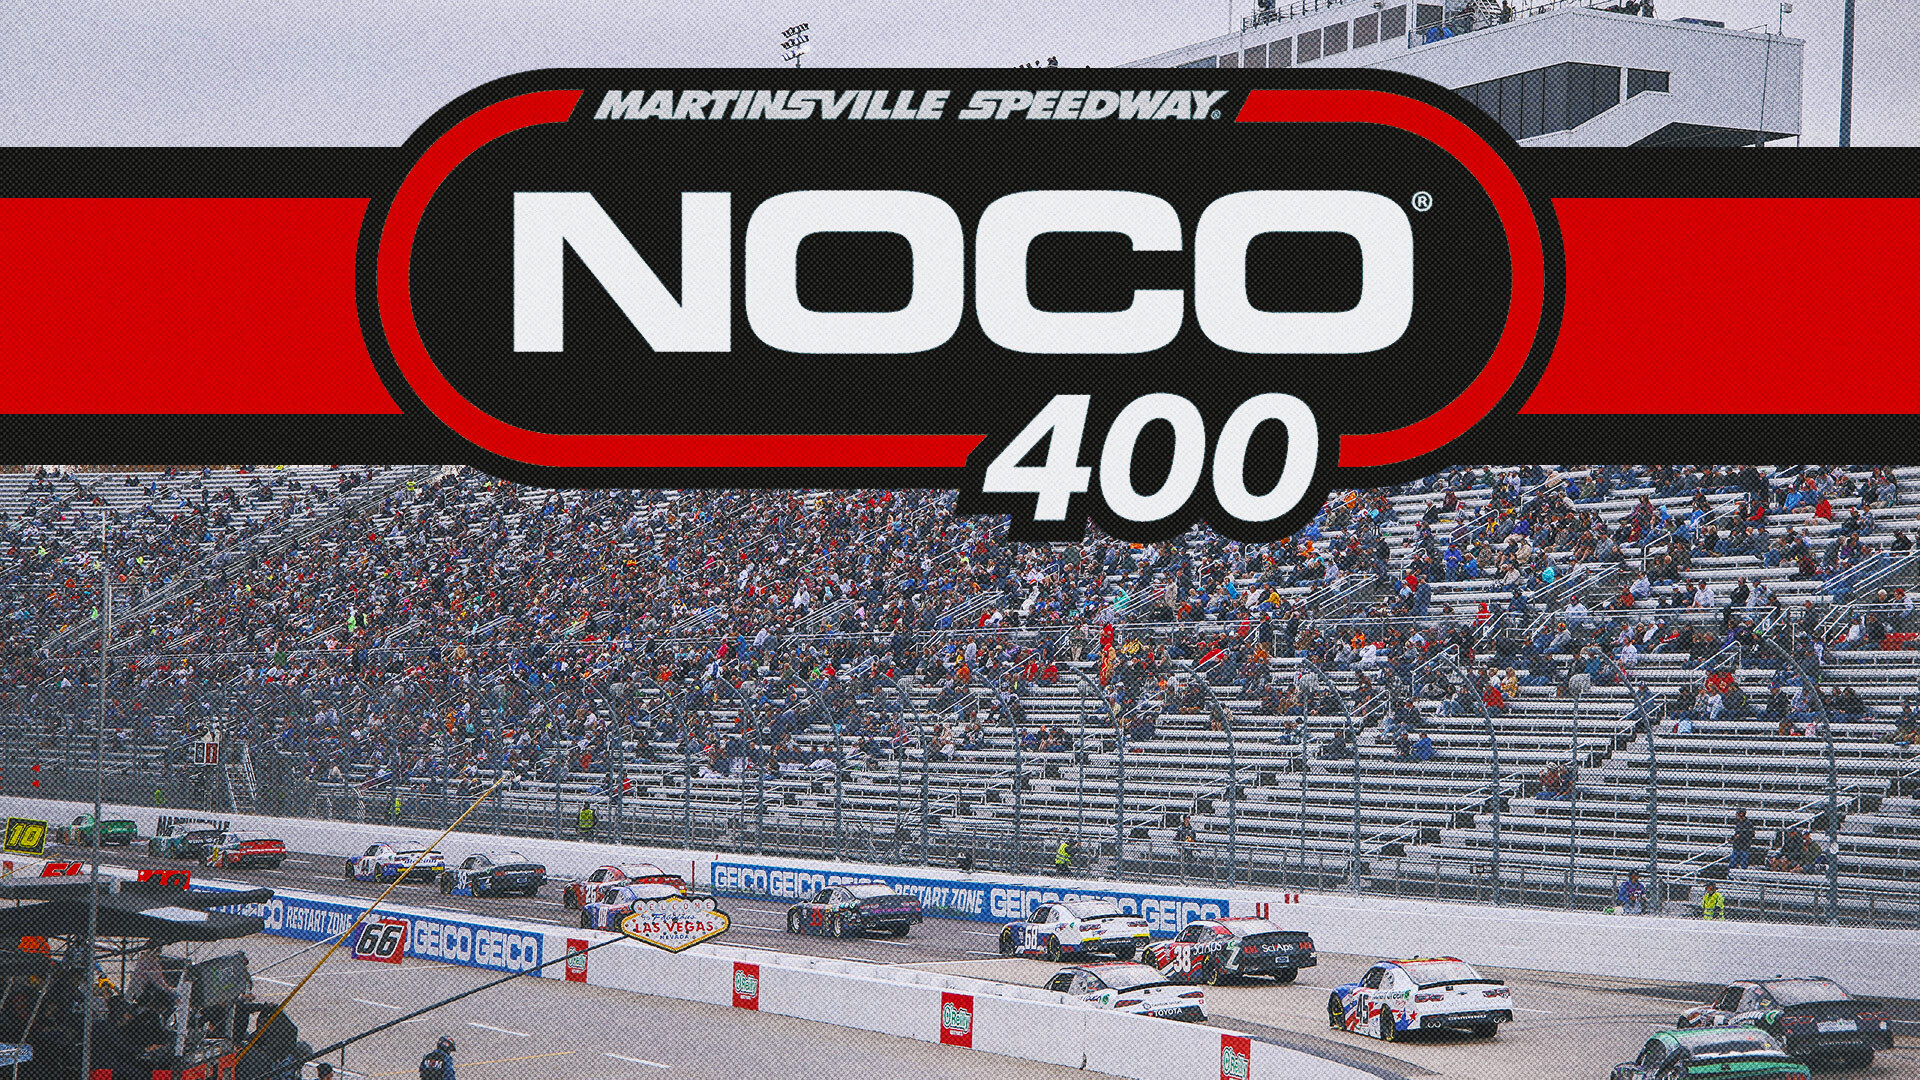 NOCO 400 live updates: Top moments from Martinsville Speedway